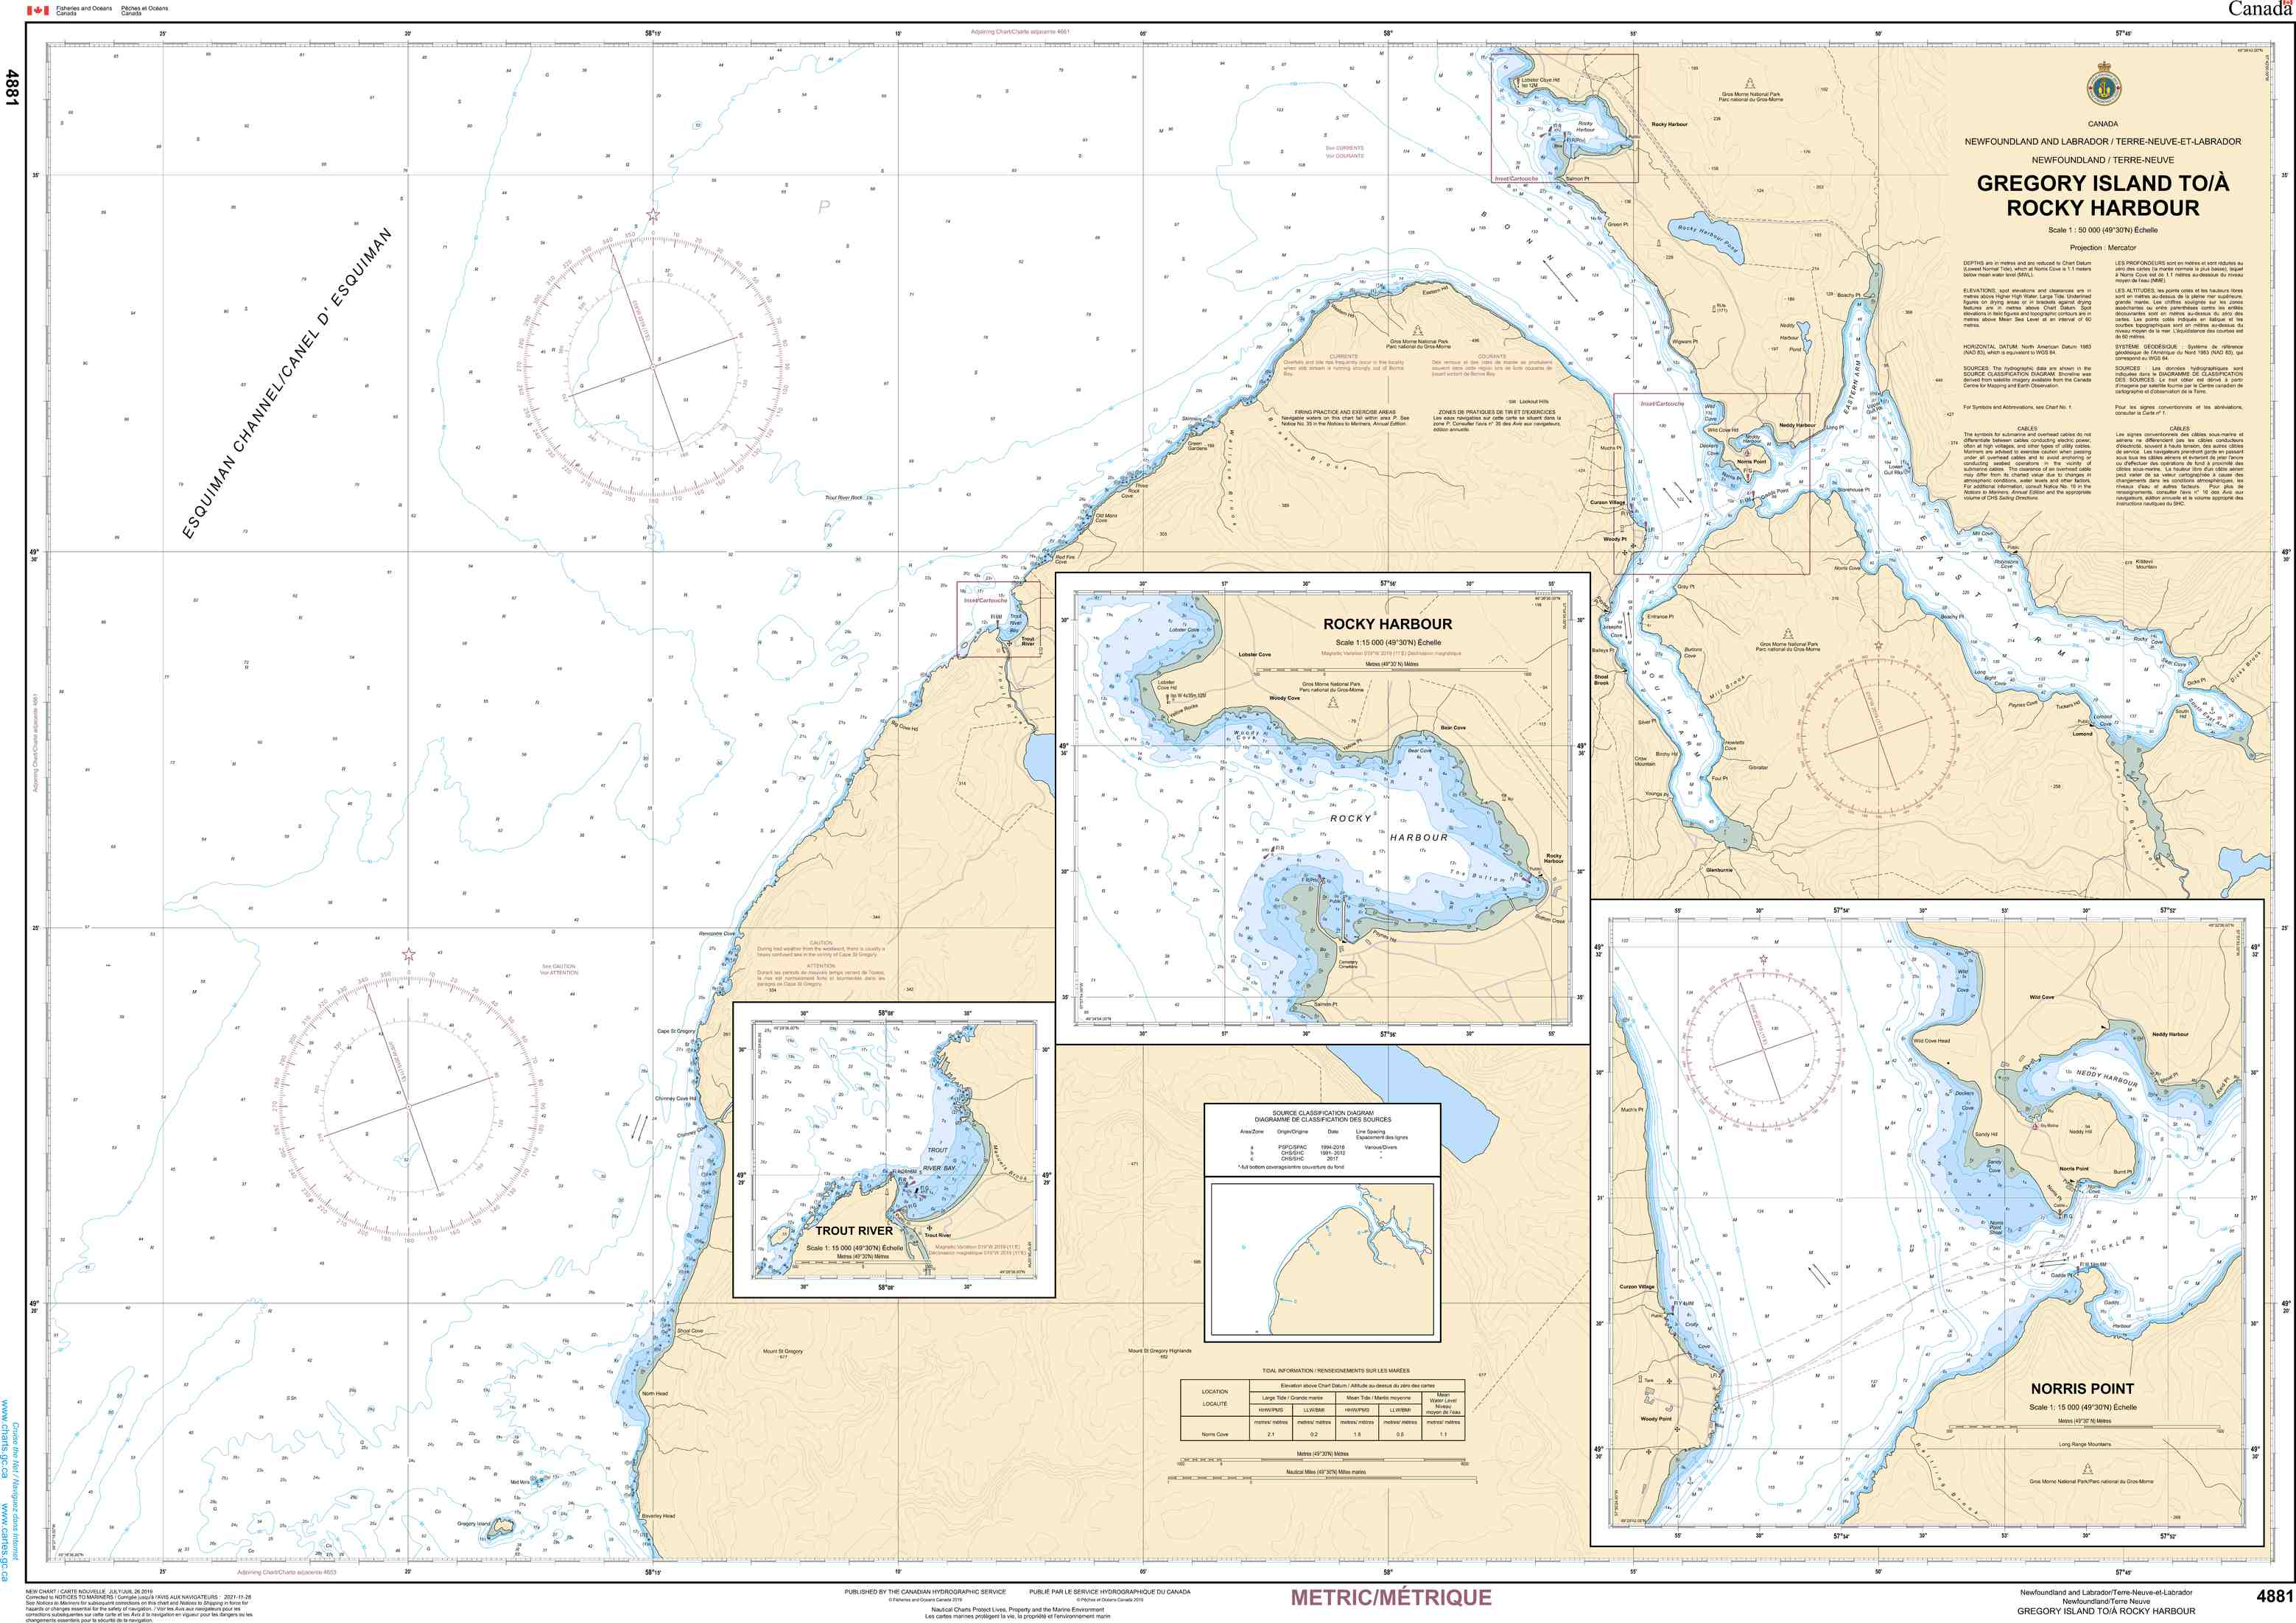 Canadian Hydrographic Service Nautical Chart CHS4881 : Chart CHSGregory Island To Rocky Harbour